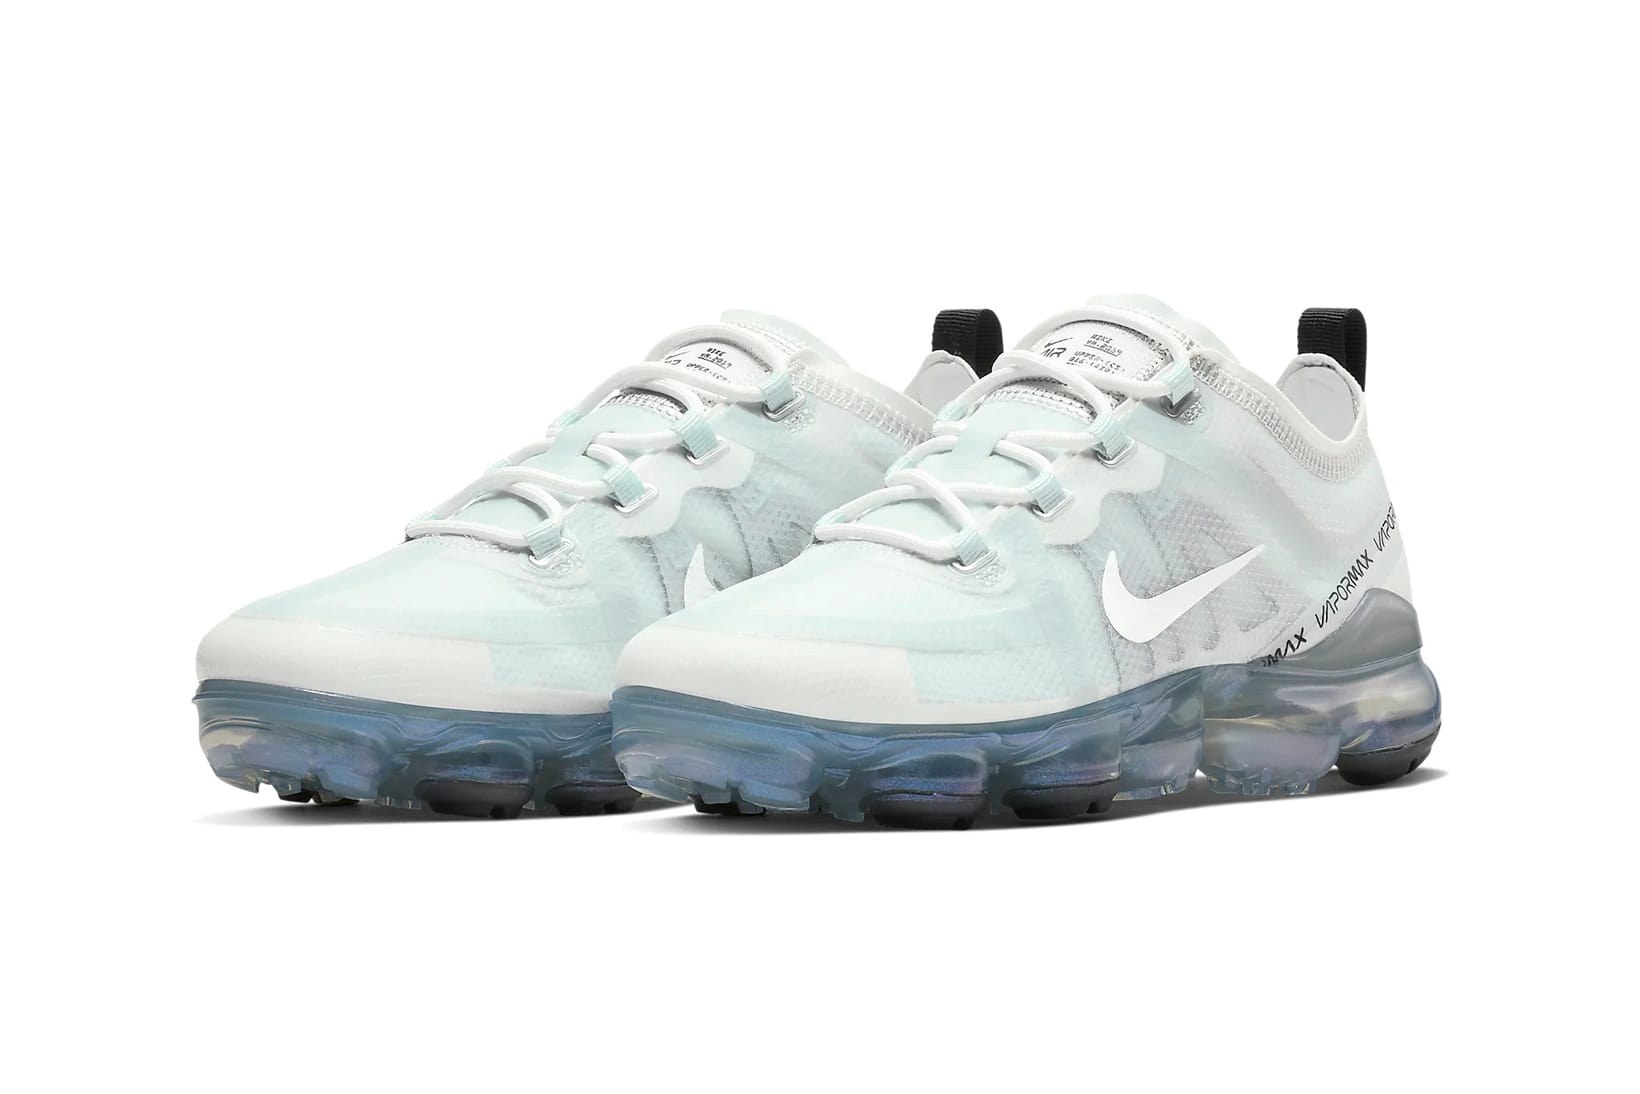 vapormax 2019 limited edition